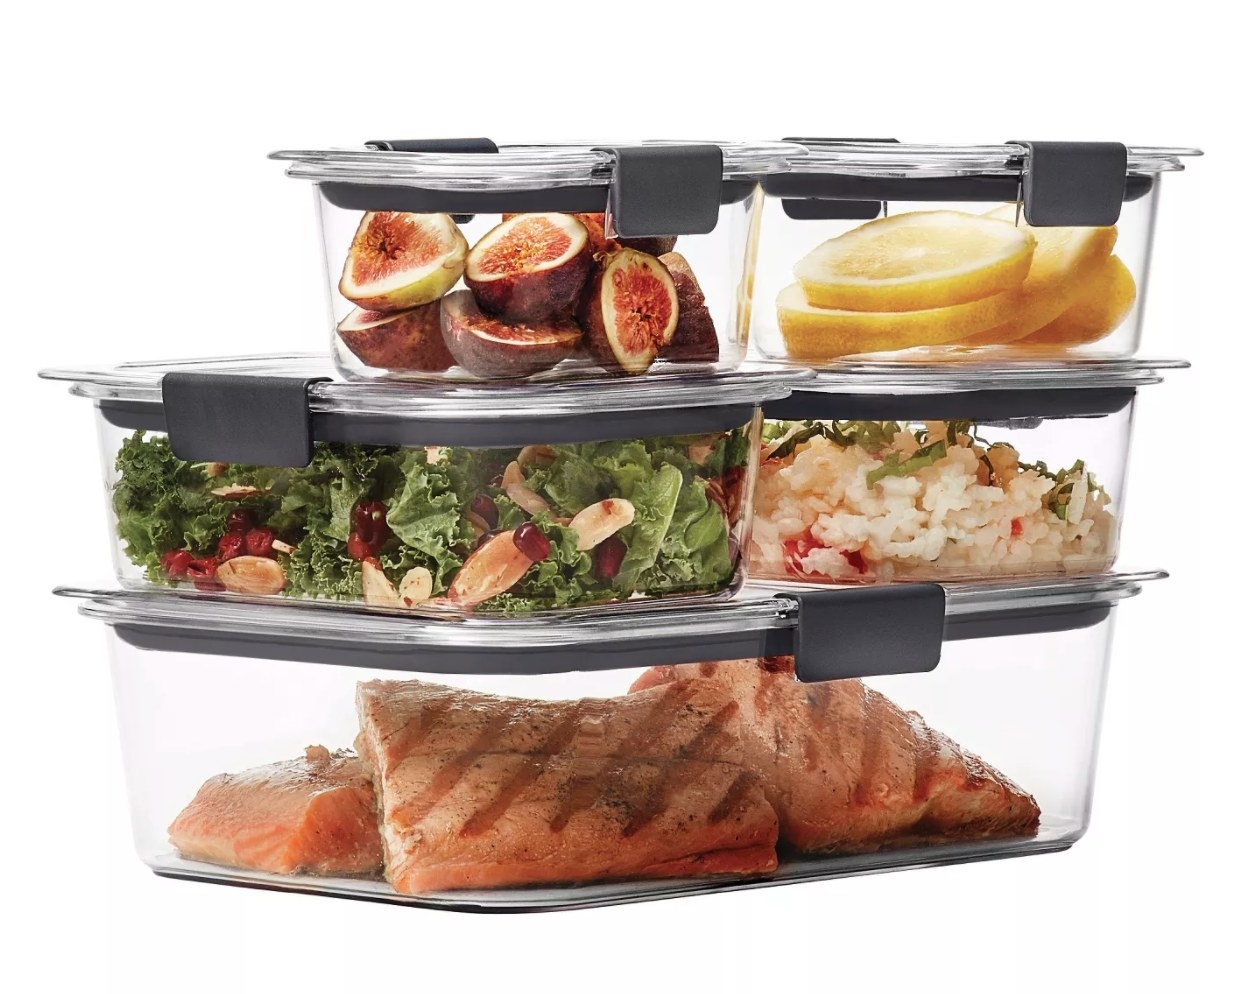 Five clear glass Rubbermaid food storage containers with gray lids